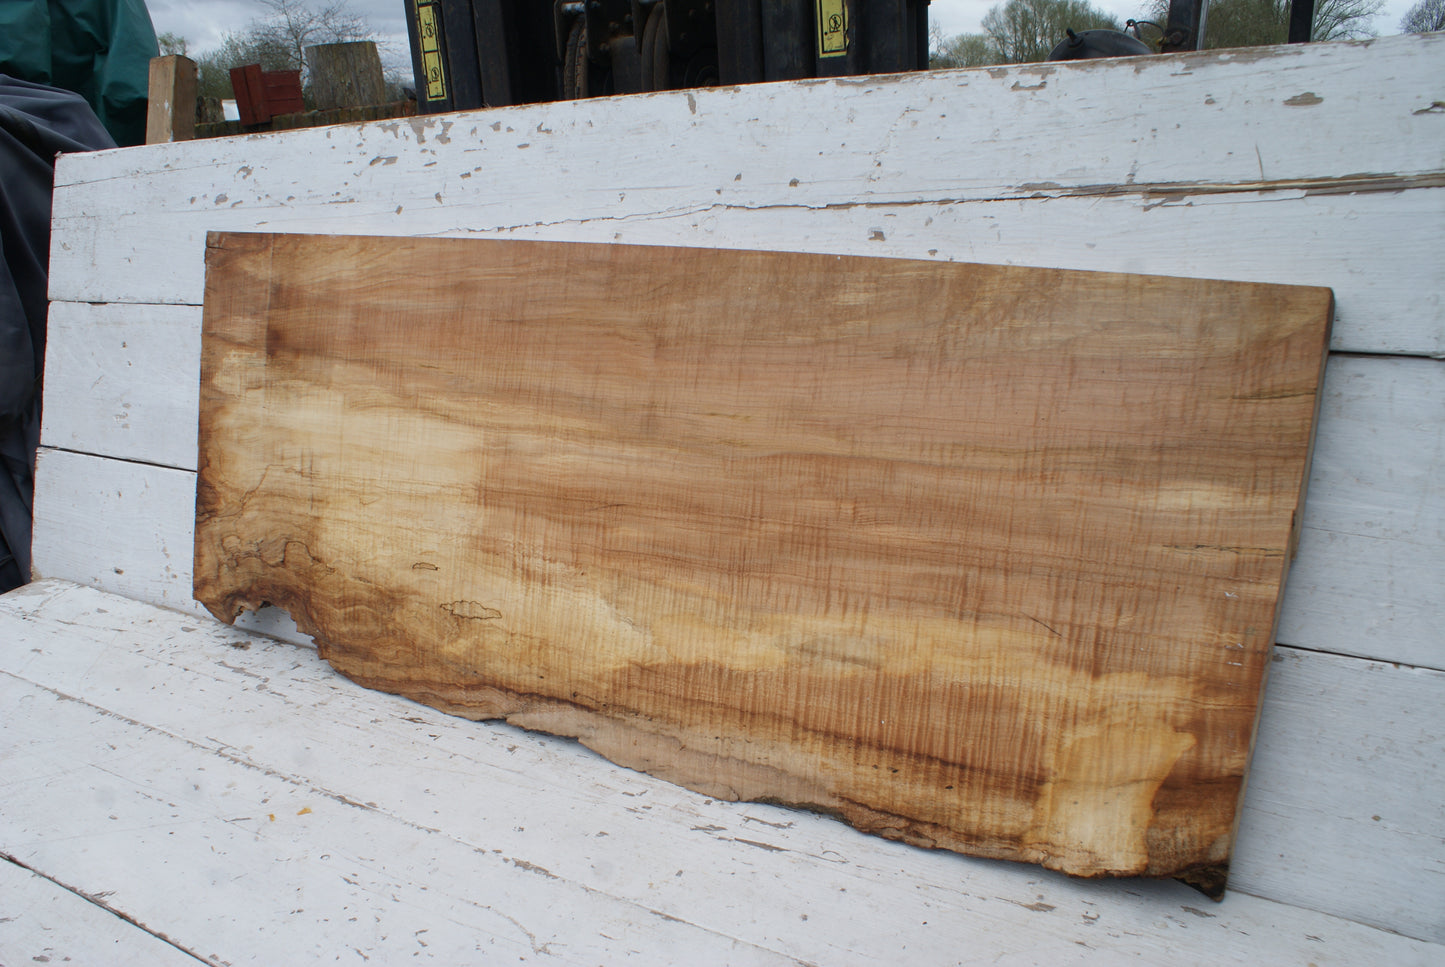 Spalted Rippled Sycamore 1271 L x 496 - 440  W x 48 D (mm) (459)